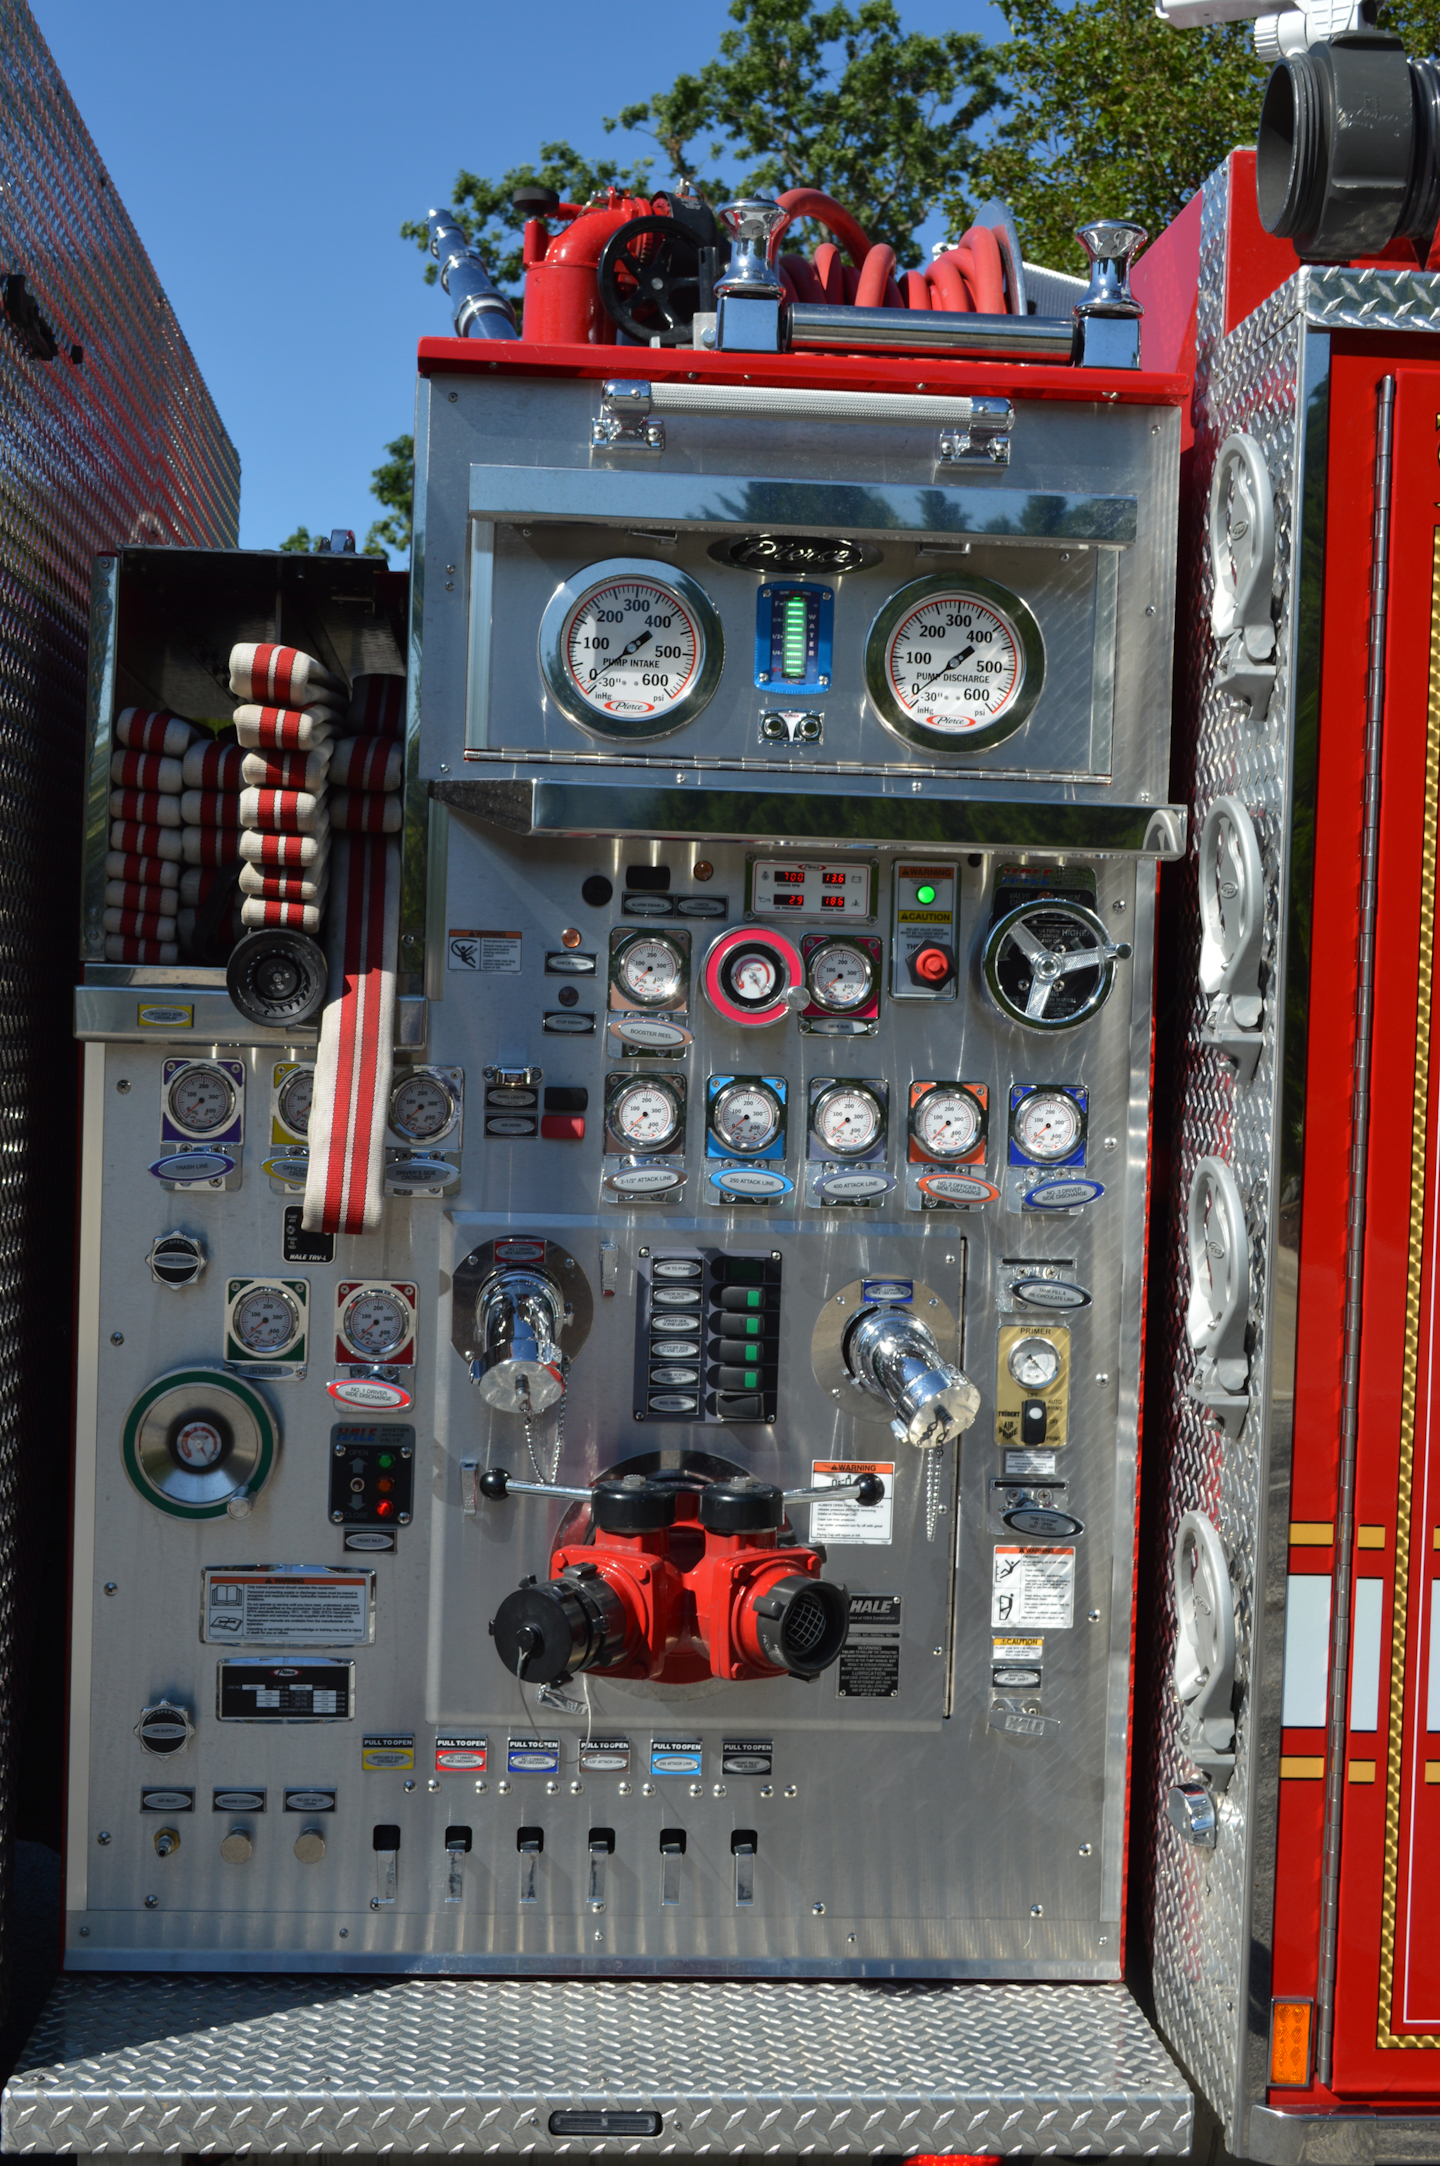 The Waldorf, MD, Volunteer Fire Department had Pierce Manufacturing construct this pump panel with a flush access panel around the steamer inlet and 2½-inch discharges. Note the location of the electronic throttle and relief valve below the 6-inch master gauges.